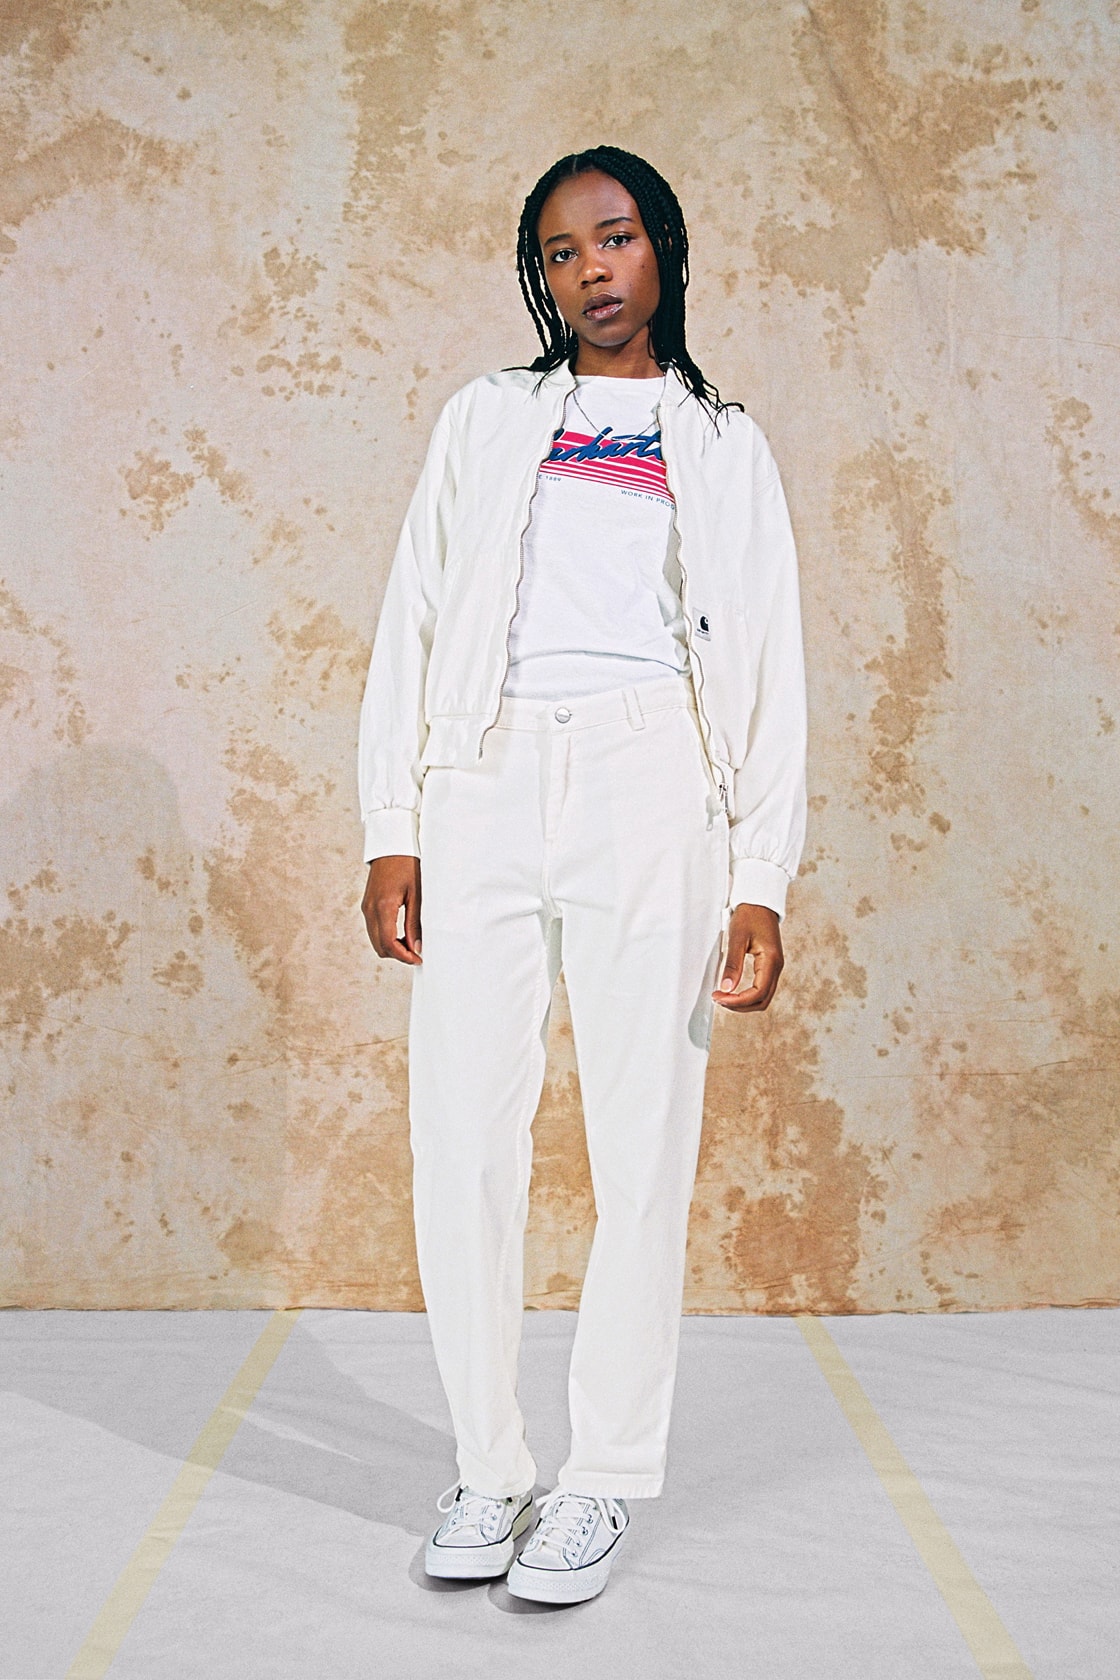 Carhartt WIP Spring/Summer 2020 Collection Active Bomber Pierce Pant Wax Rinsed